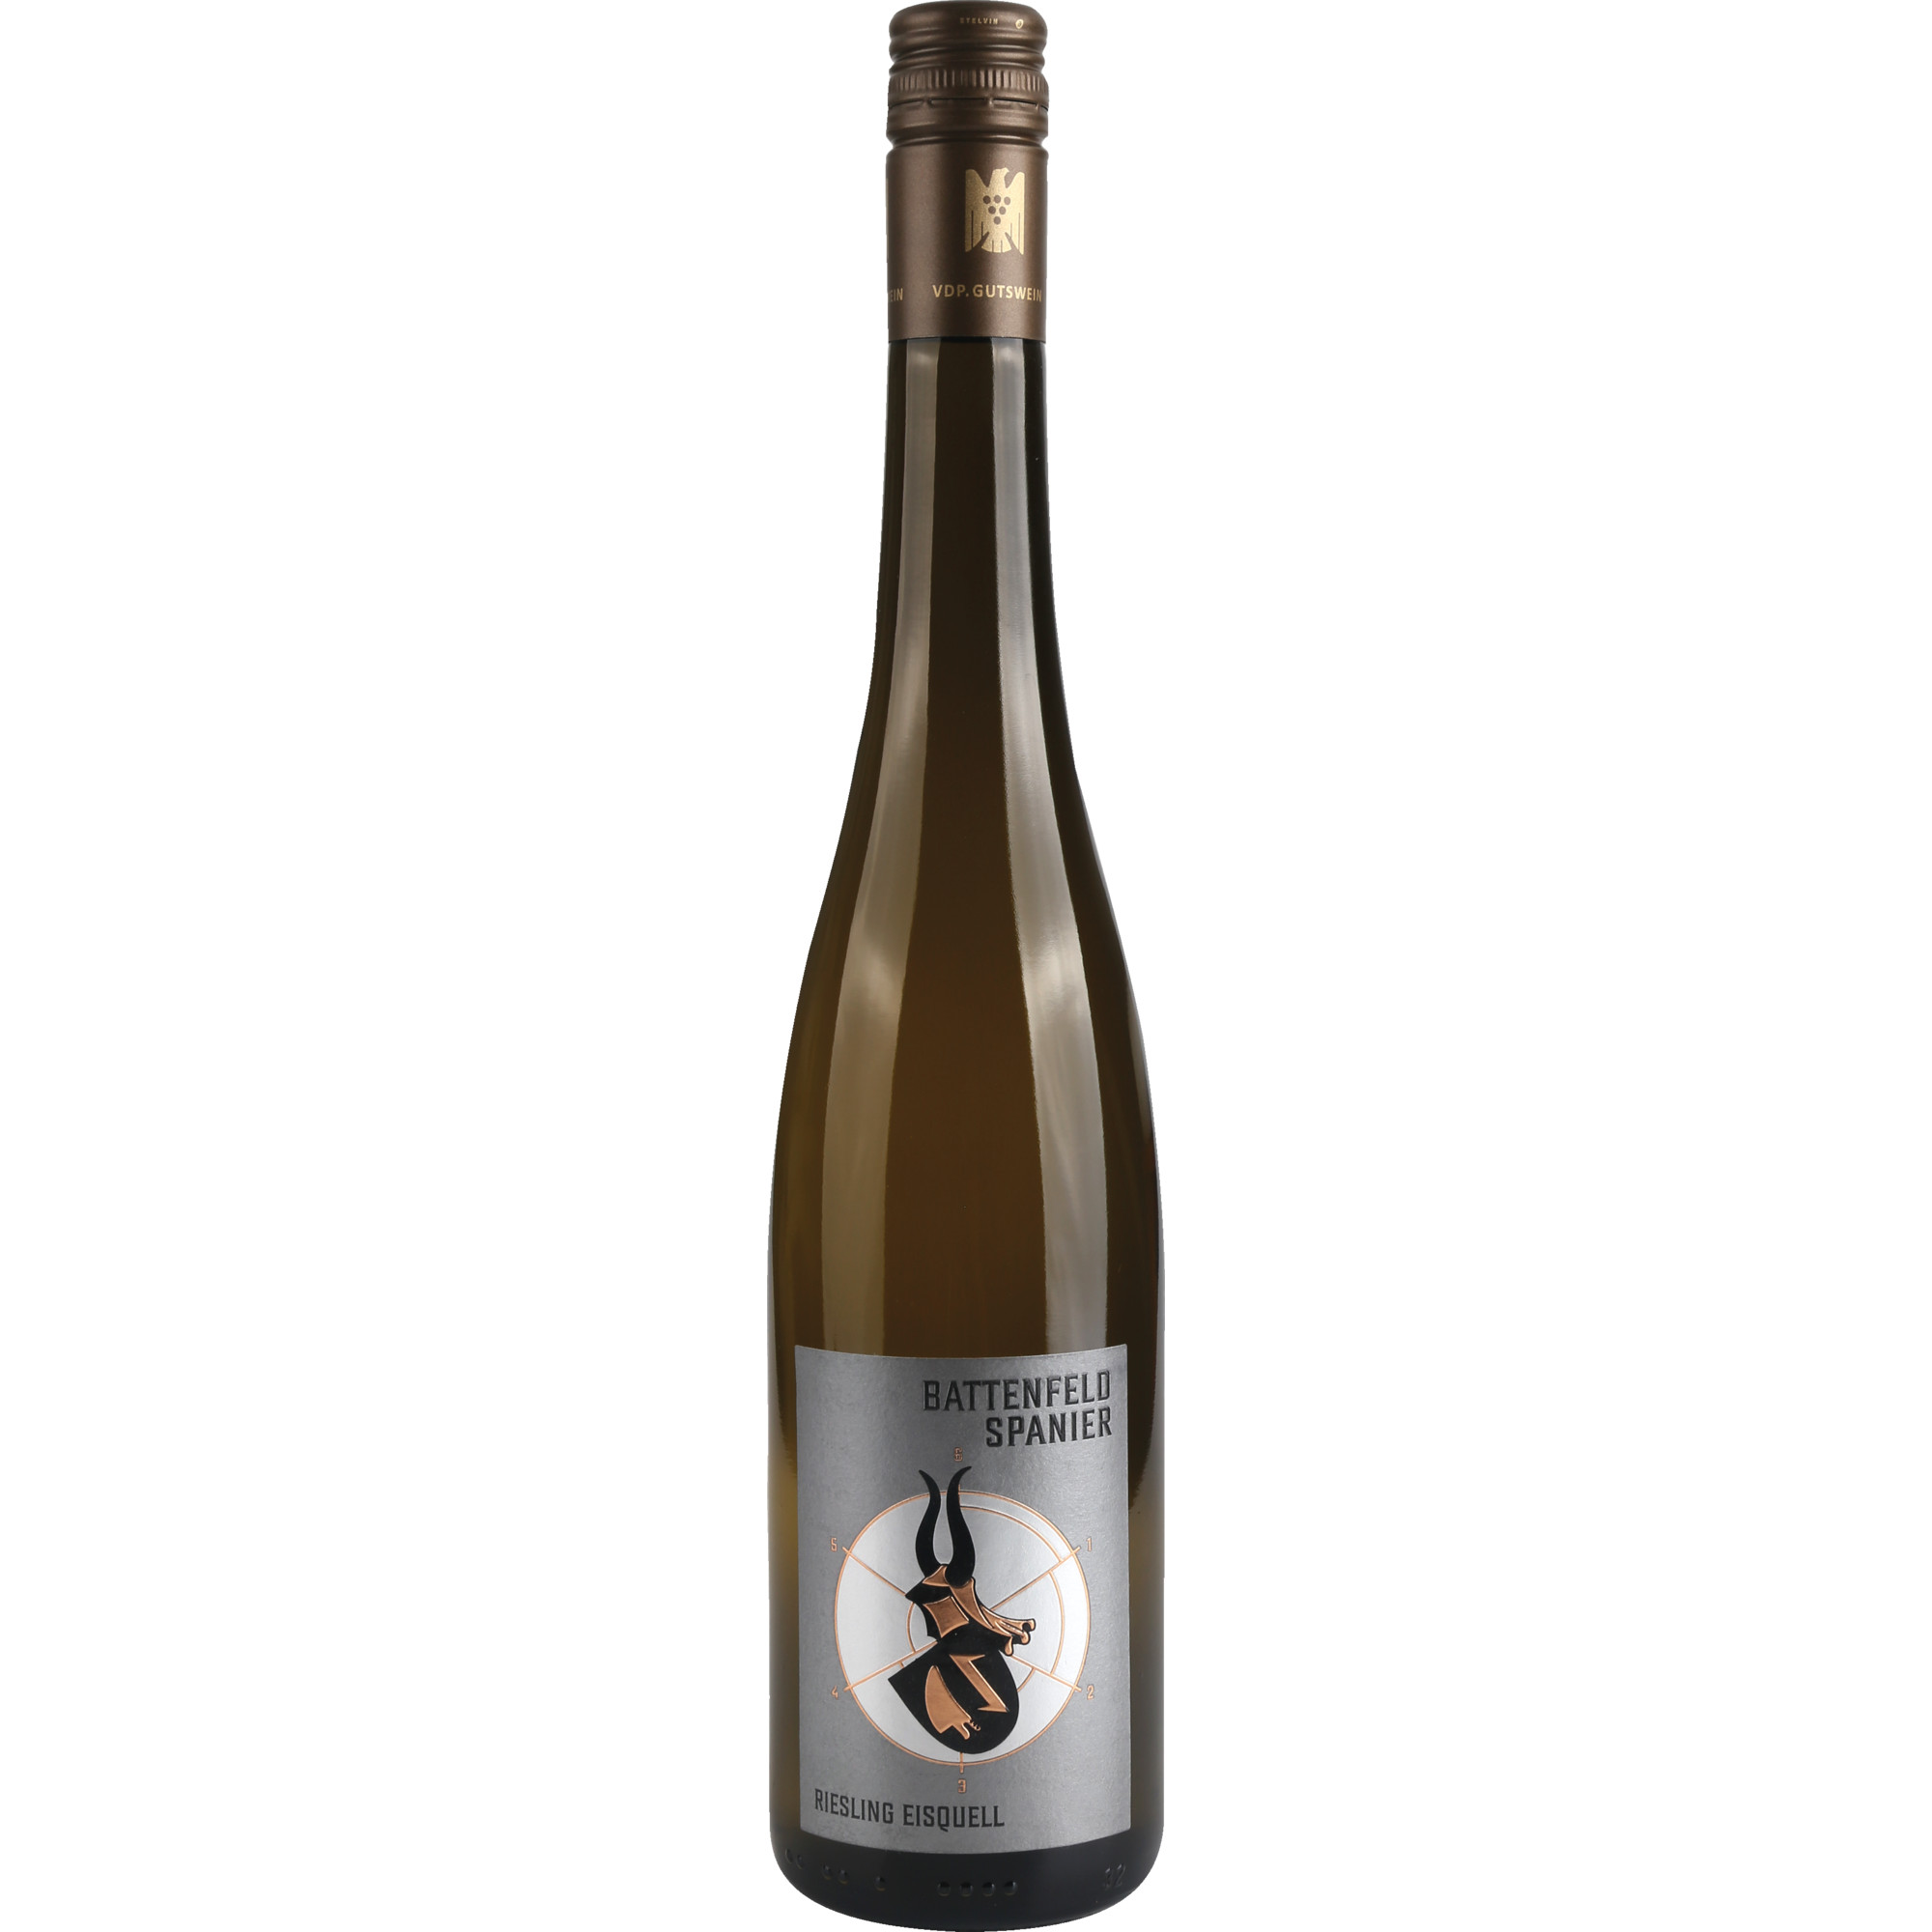 Image of Battenfeld-Spanier Riesling Eisquell 2021